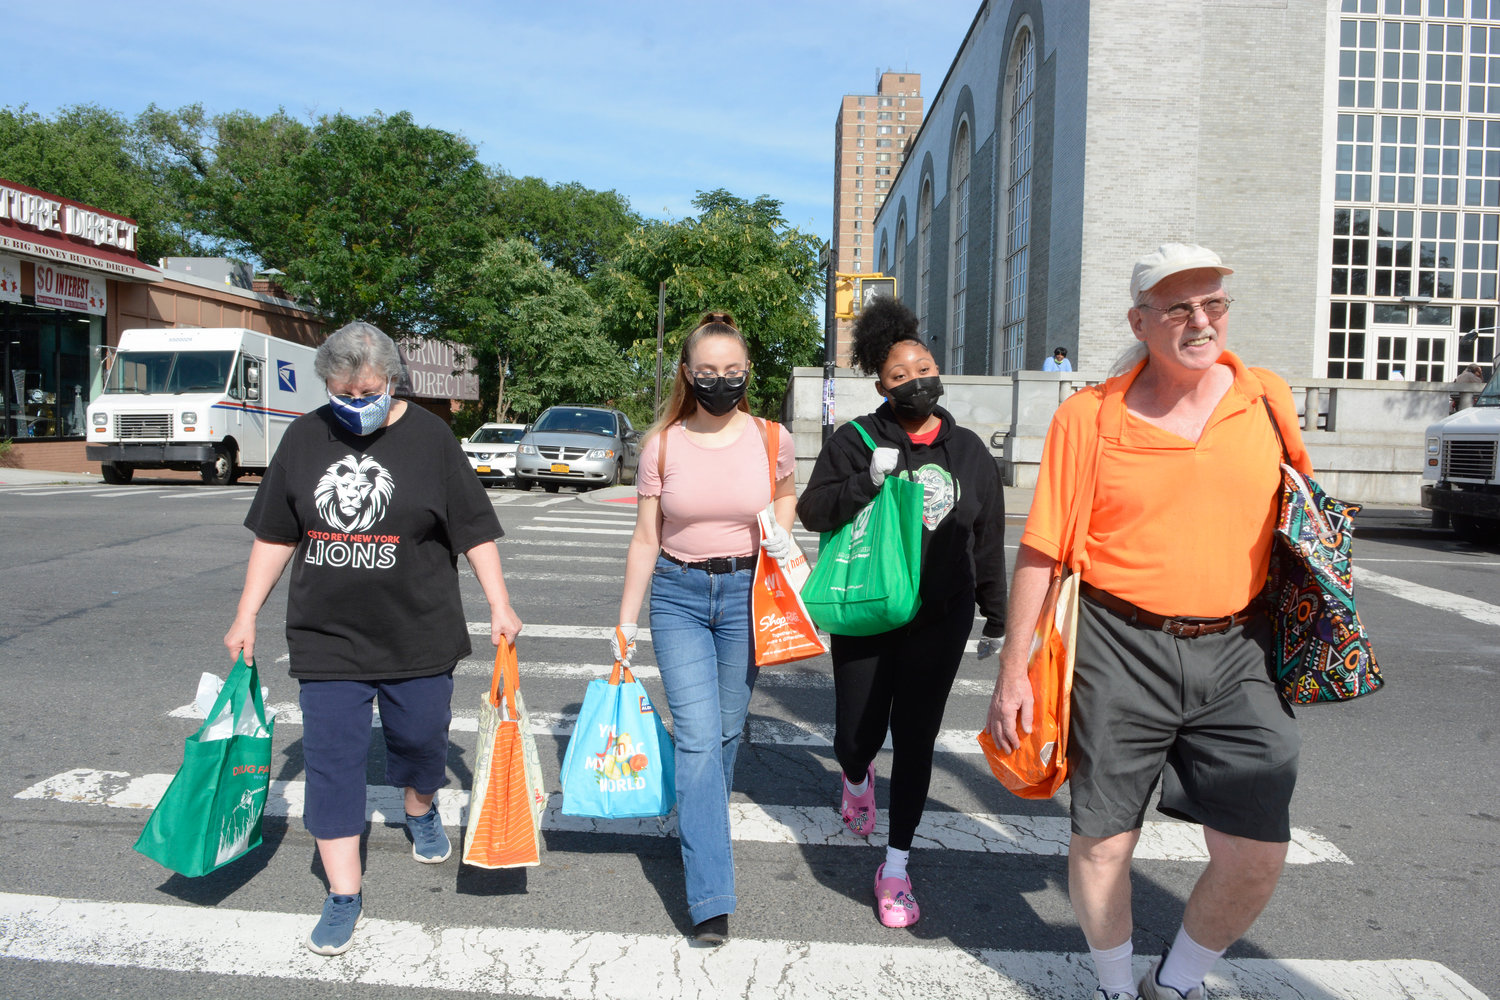 WALKING WITH HOPE—Marty Rogers, right, and Sister Jude Biank, S.C.C., left, a faculty member of Cristo Rey High School in East Harlem, are joined on the June 25 Hope Walk through the streets of the Melrose section of the South Bronx by Cristo Rey students Stephanie Reyes and Kaela Dolmo.